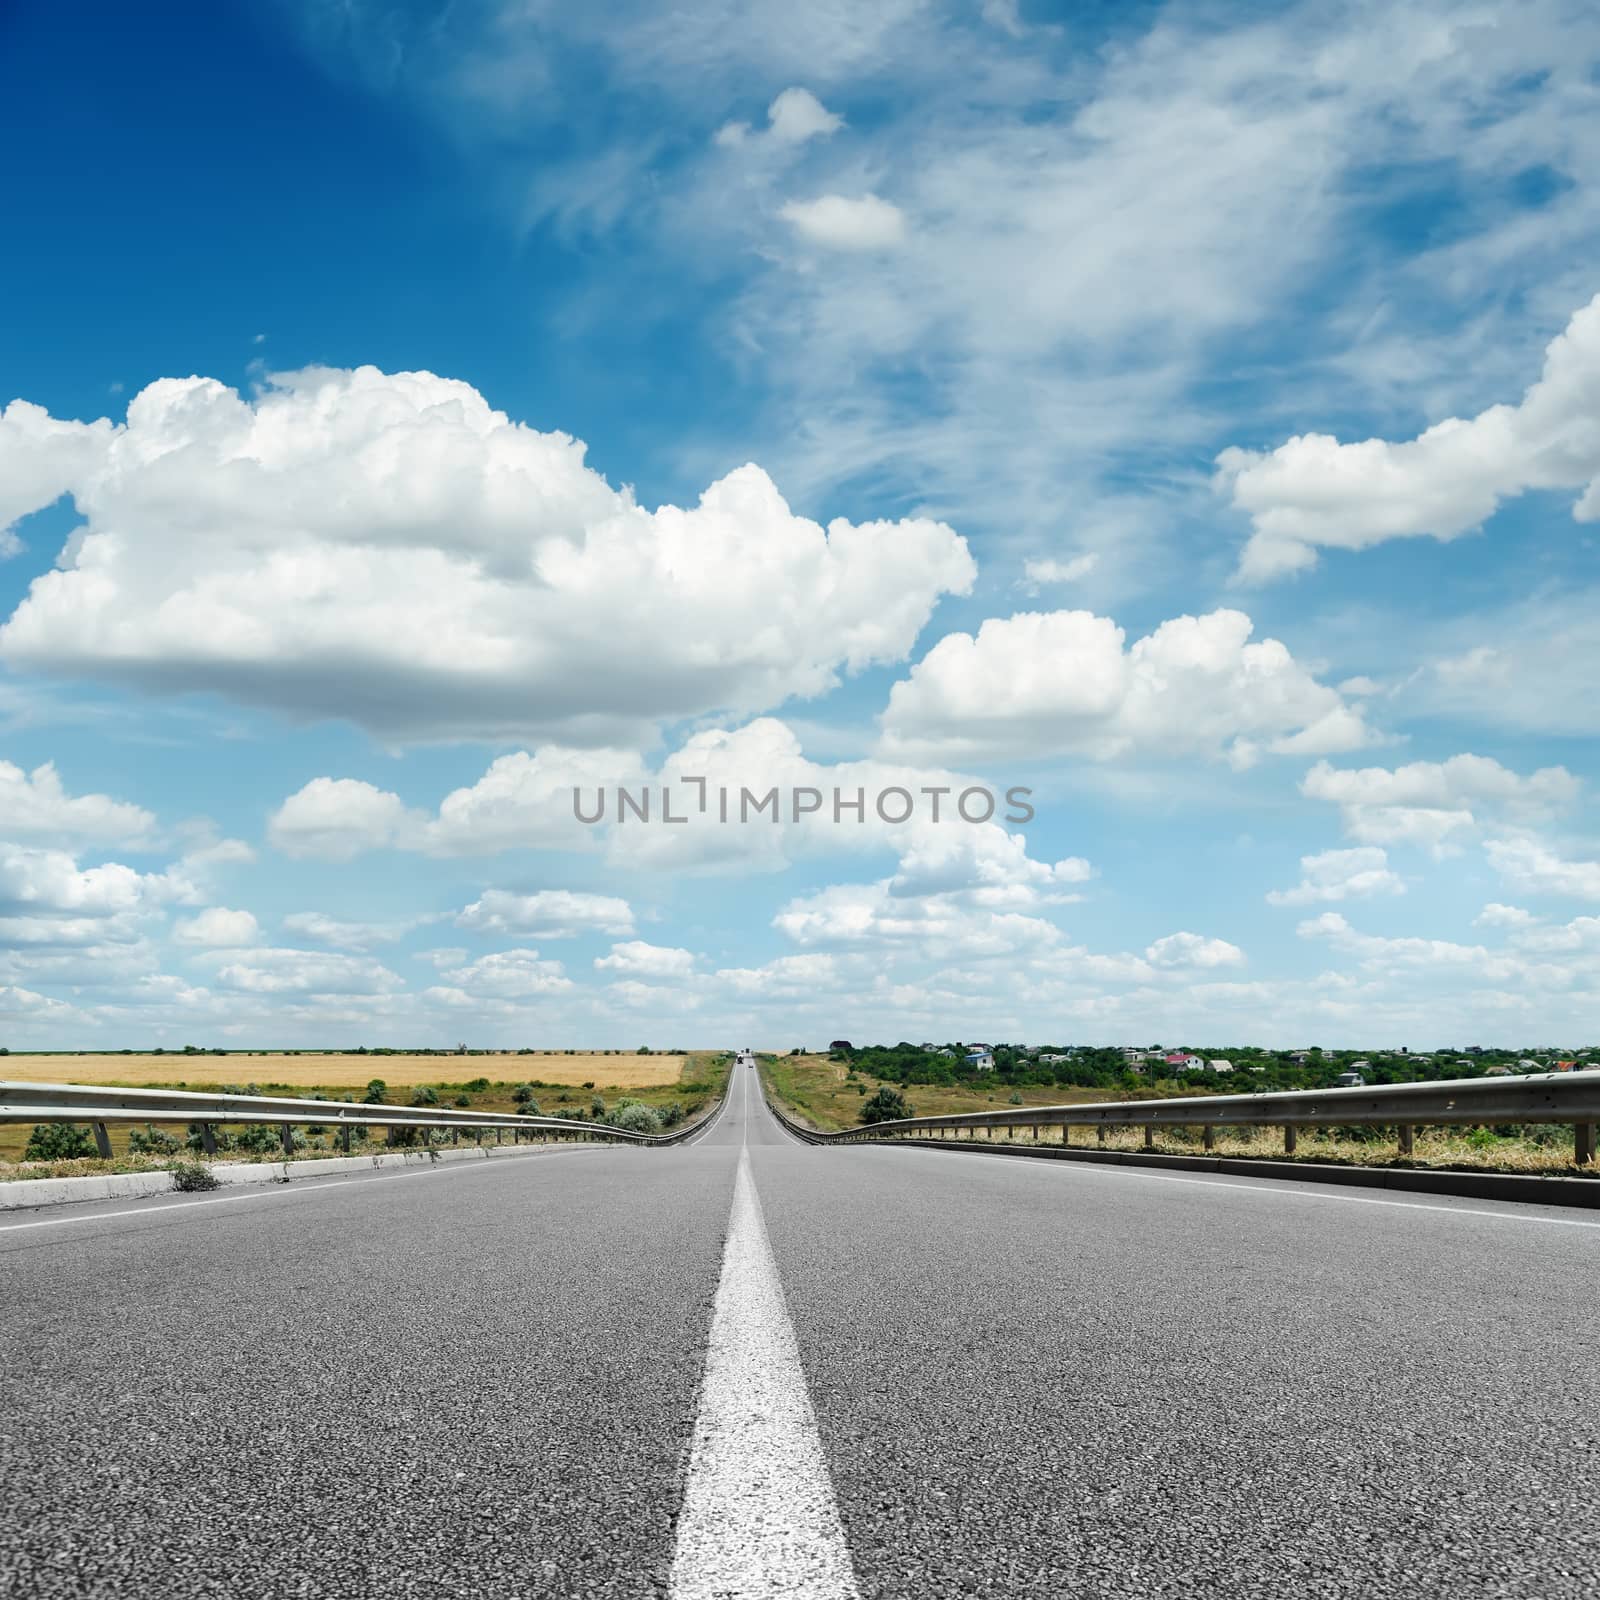 asphalt road with white line on center close up under cloudy sky